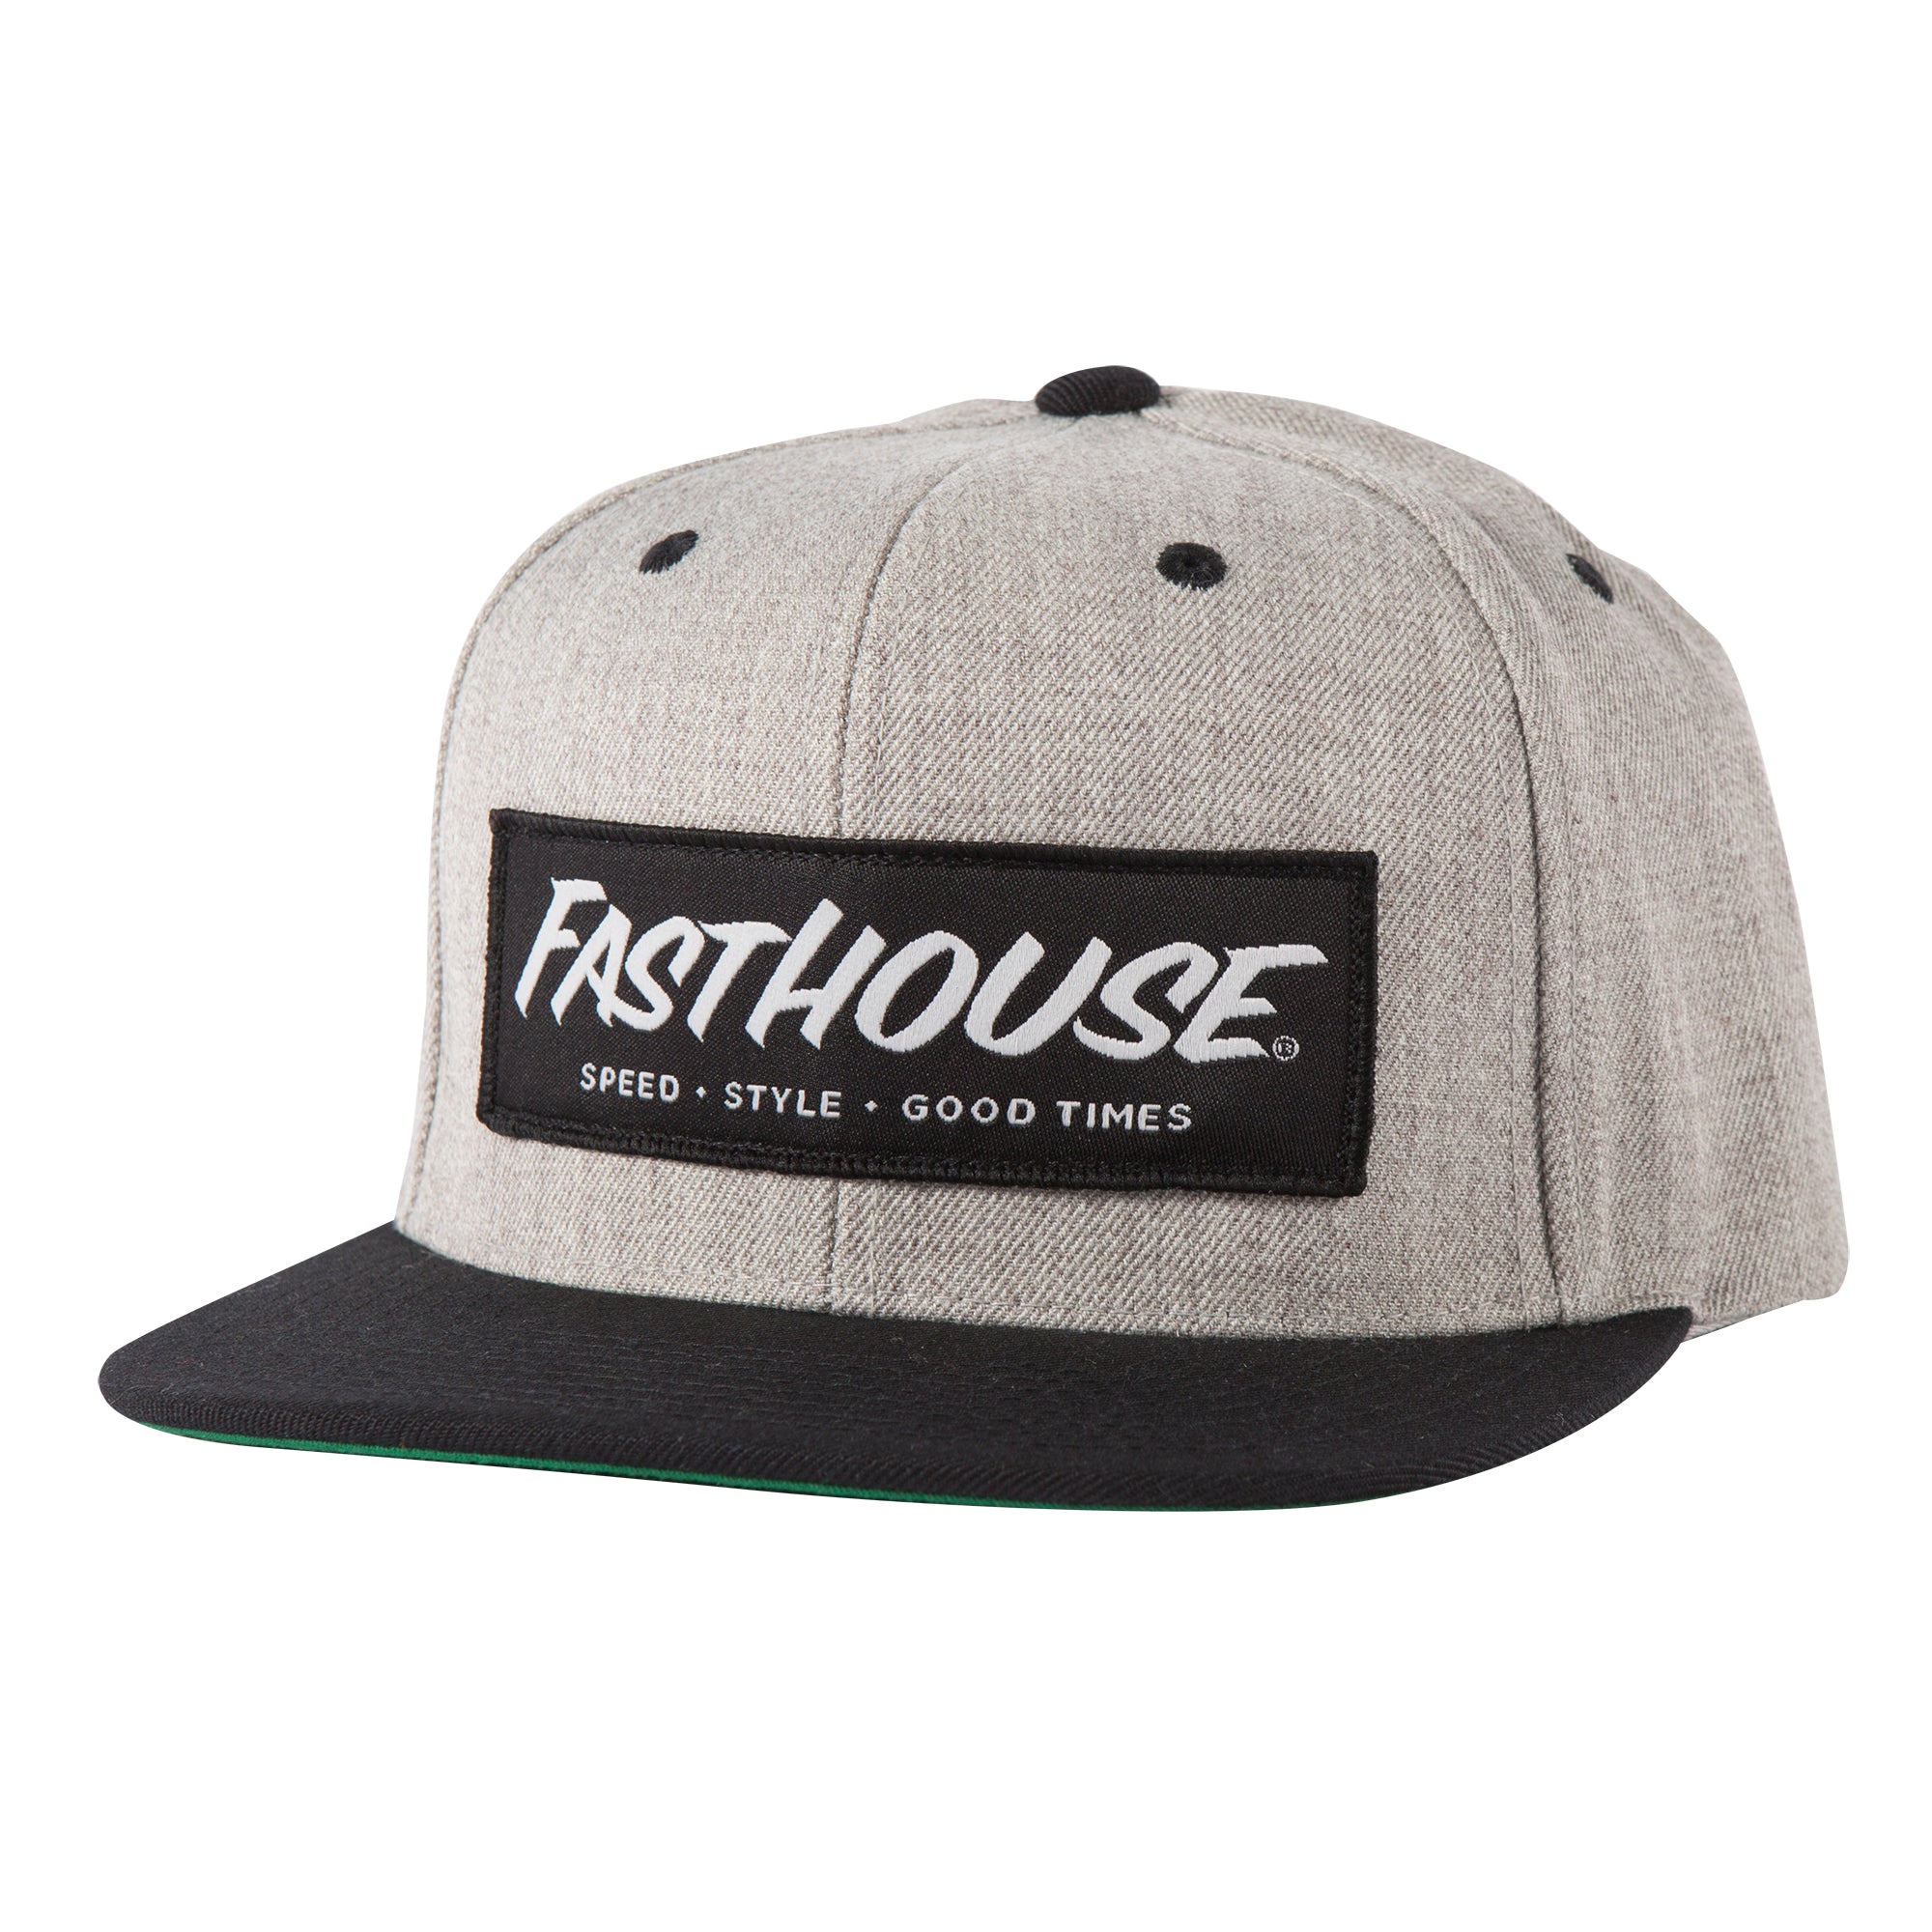 Fasthouse - Speed Style Good Times Hat - Grey/Black